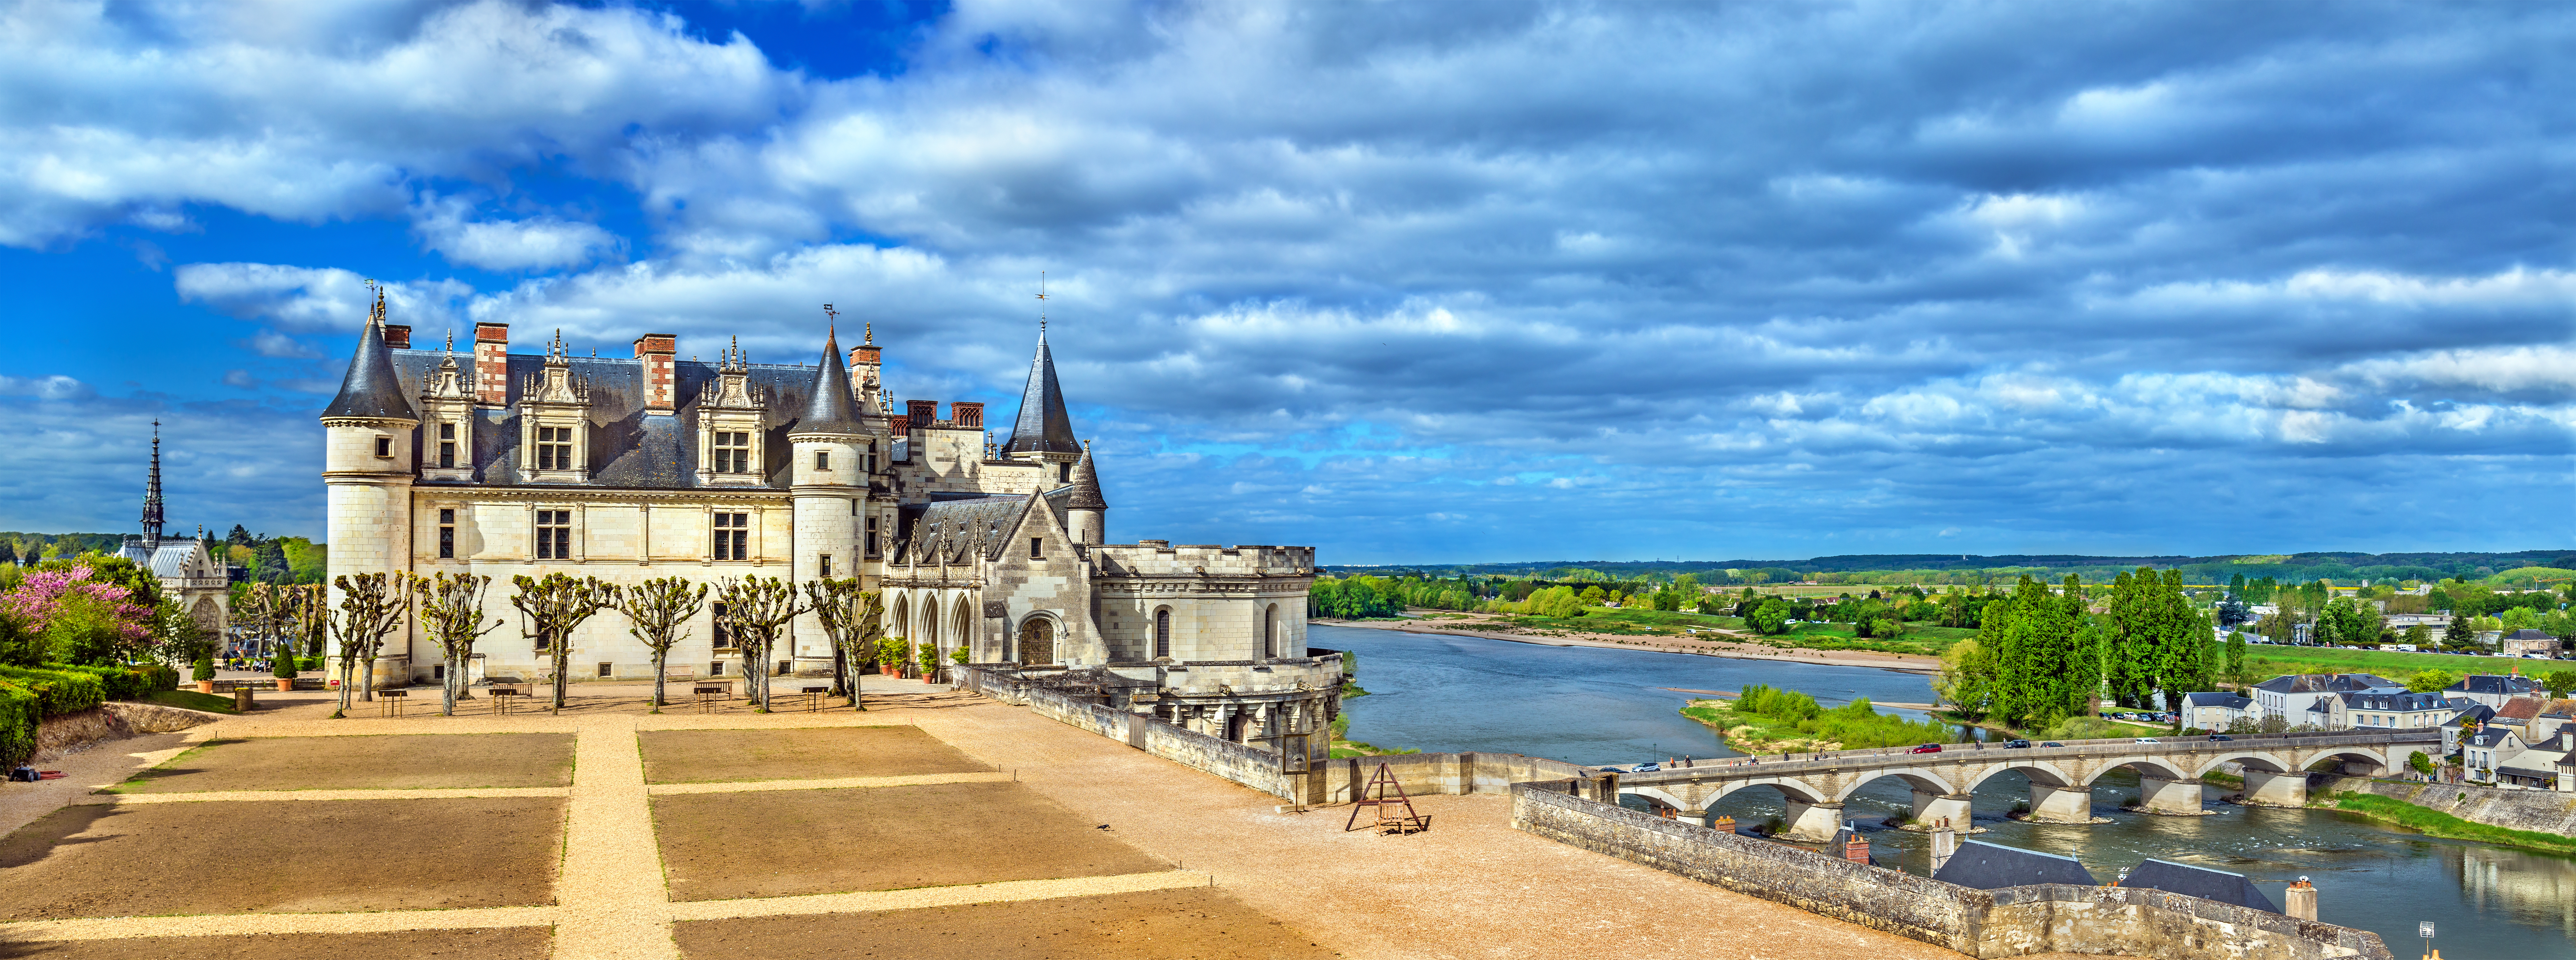 tourhub | Exodus | Cycling The Chateaux Of The Loire - Deluxe | C07LX